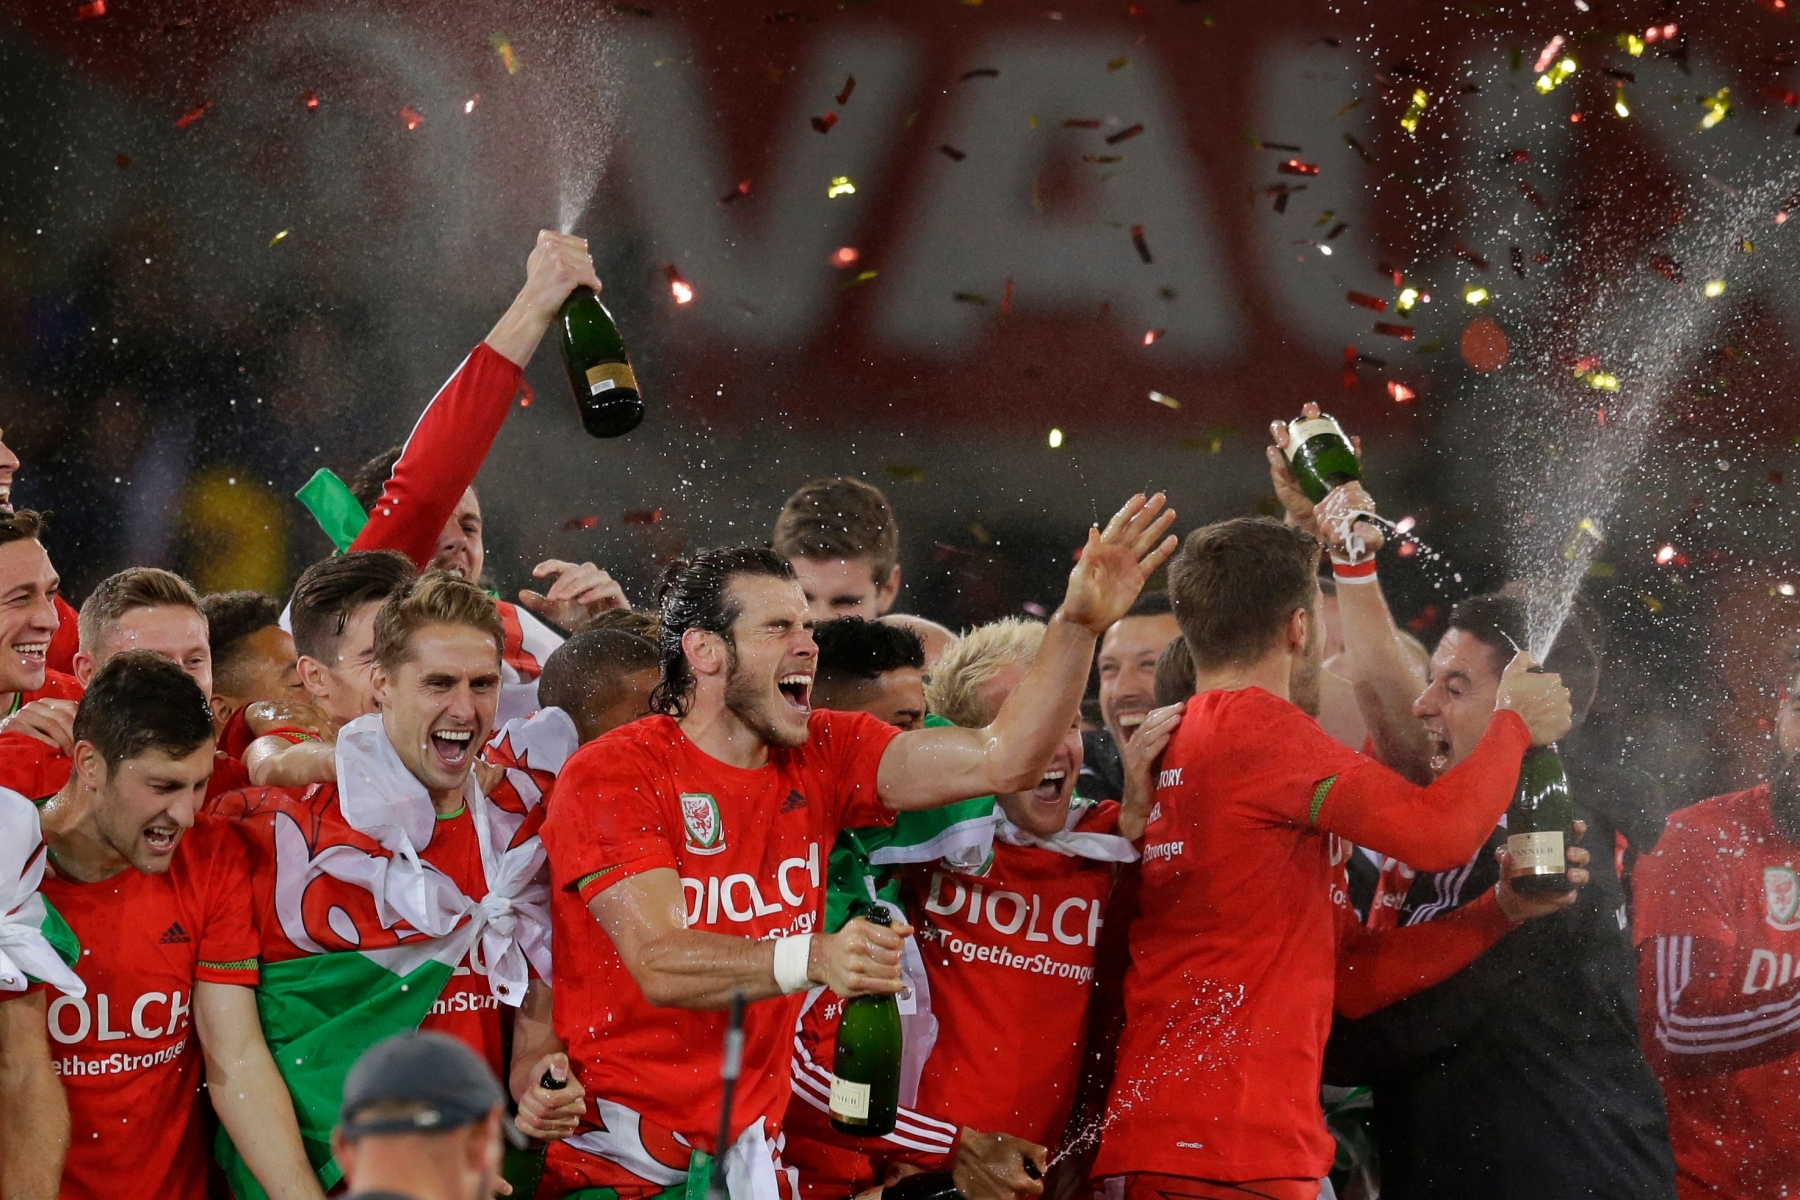 Wales' Gareth Bale, center, celebrates with his teammates after they qualified for the Euro 2016 tournament after defeating Andorra 2-0 in the Euro 2016 Group B soccer match between Wales and Andorra at Cardiff City stadium in Cardiff, Tuesday, Oct. 13, 2015.  (AP Photo/Matt Dunham) Britain Wales Andorra Euro Soccer